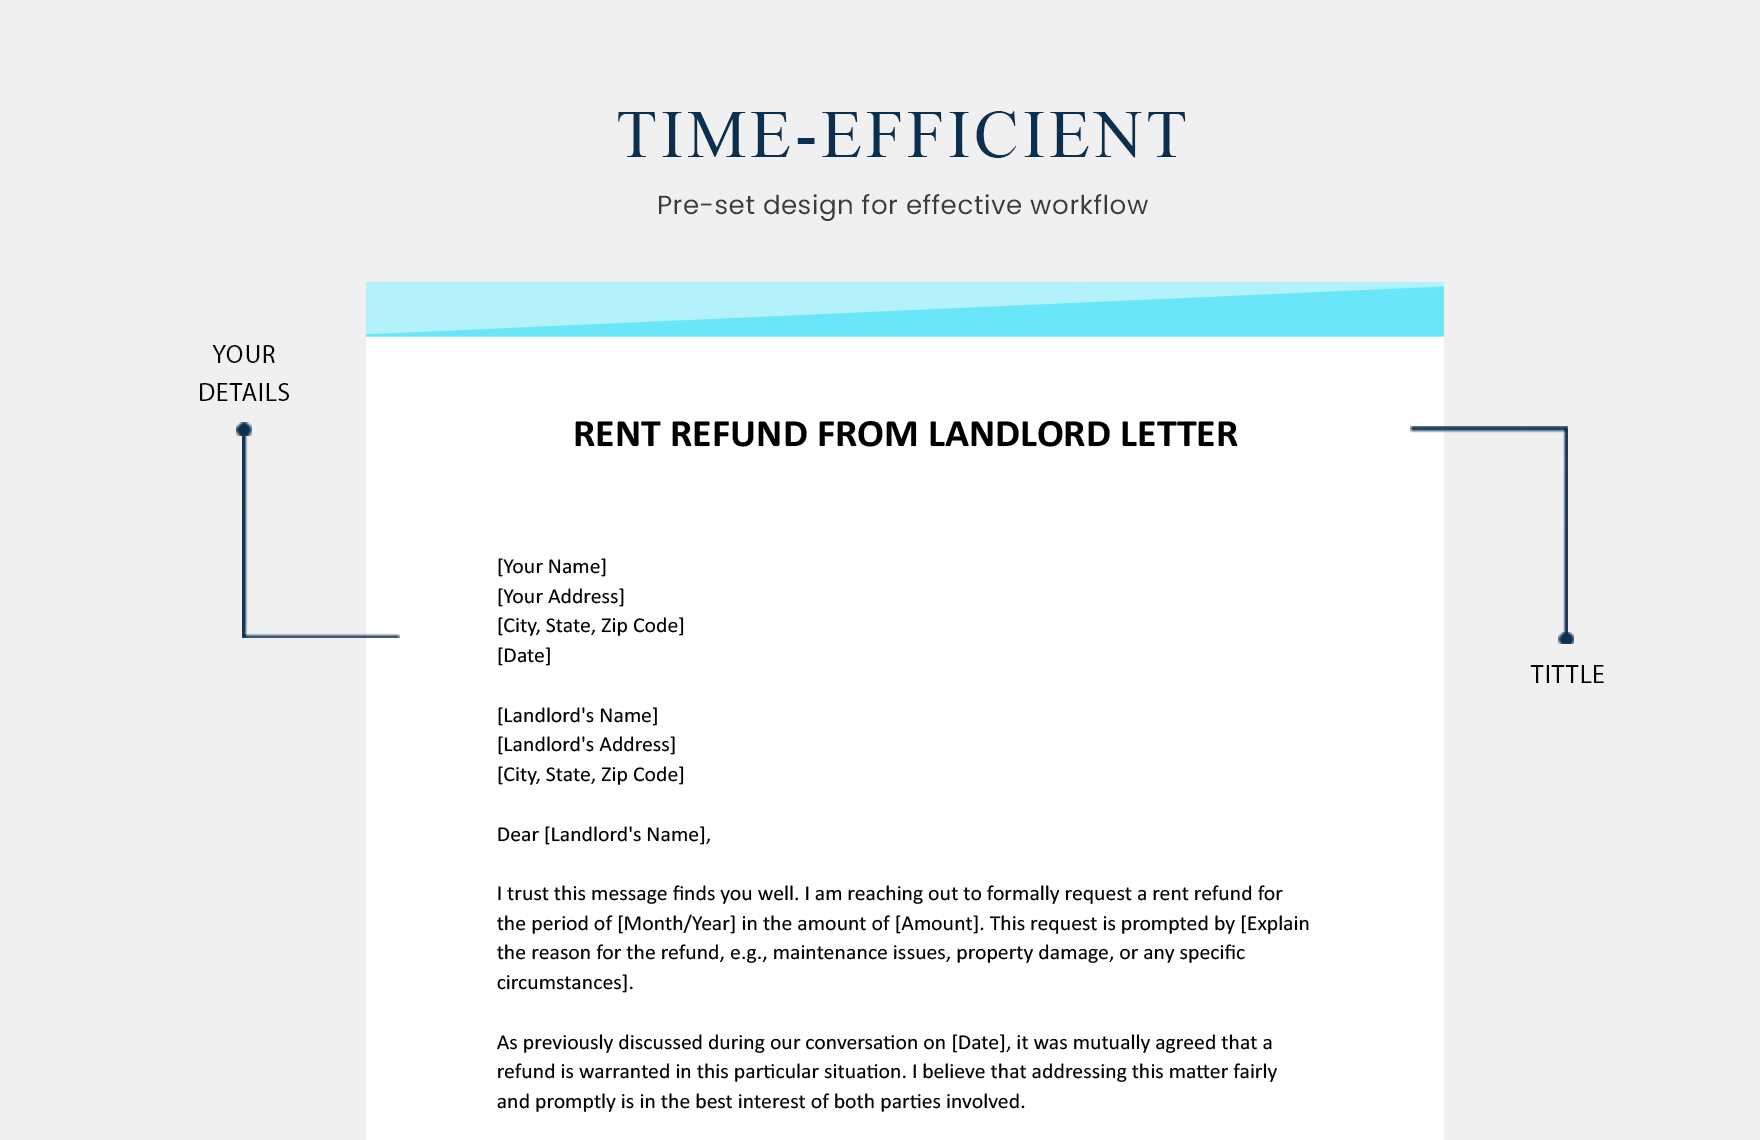 Rent Refund From Landlord Letter